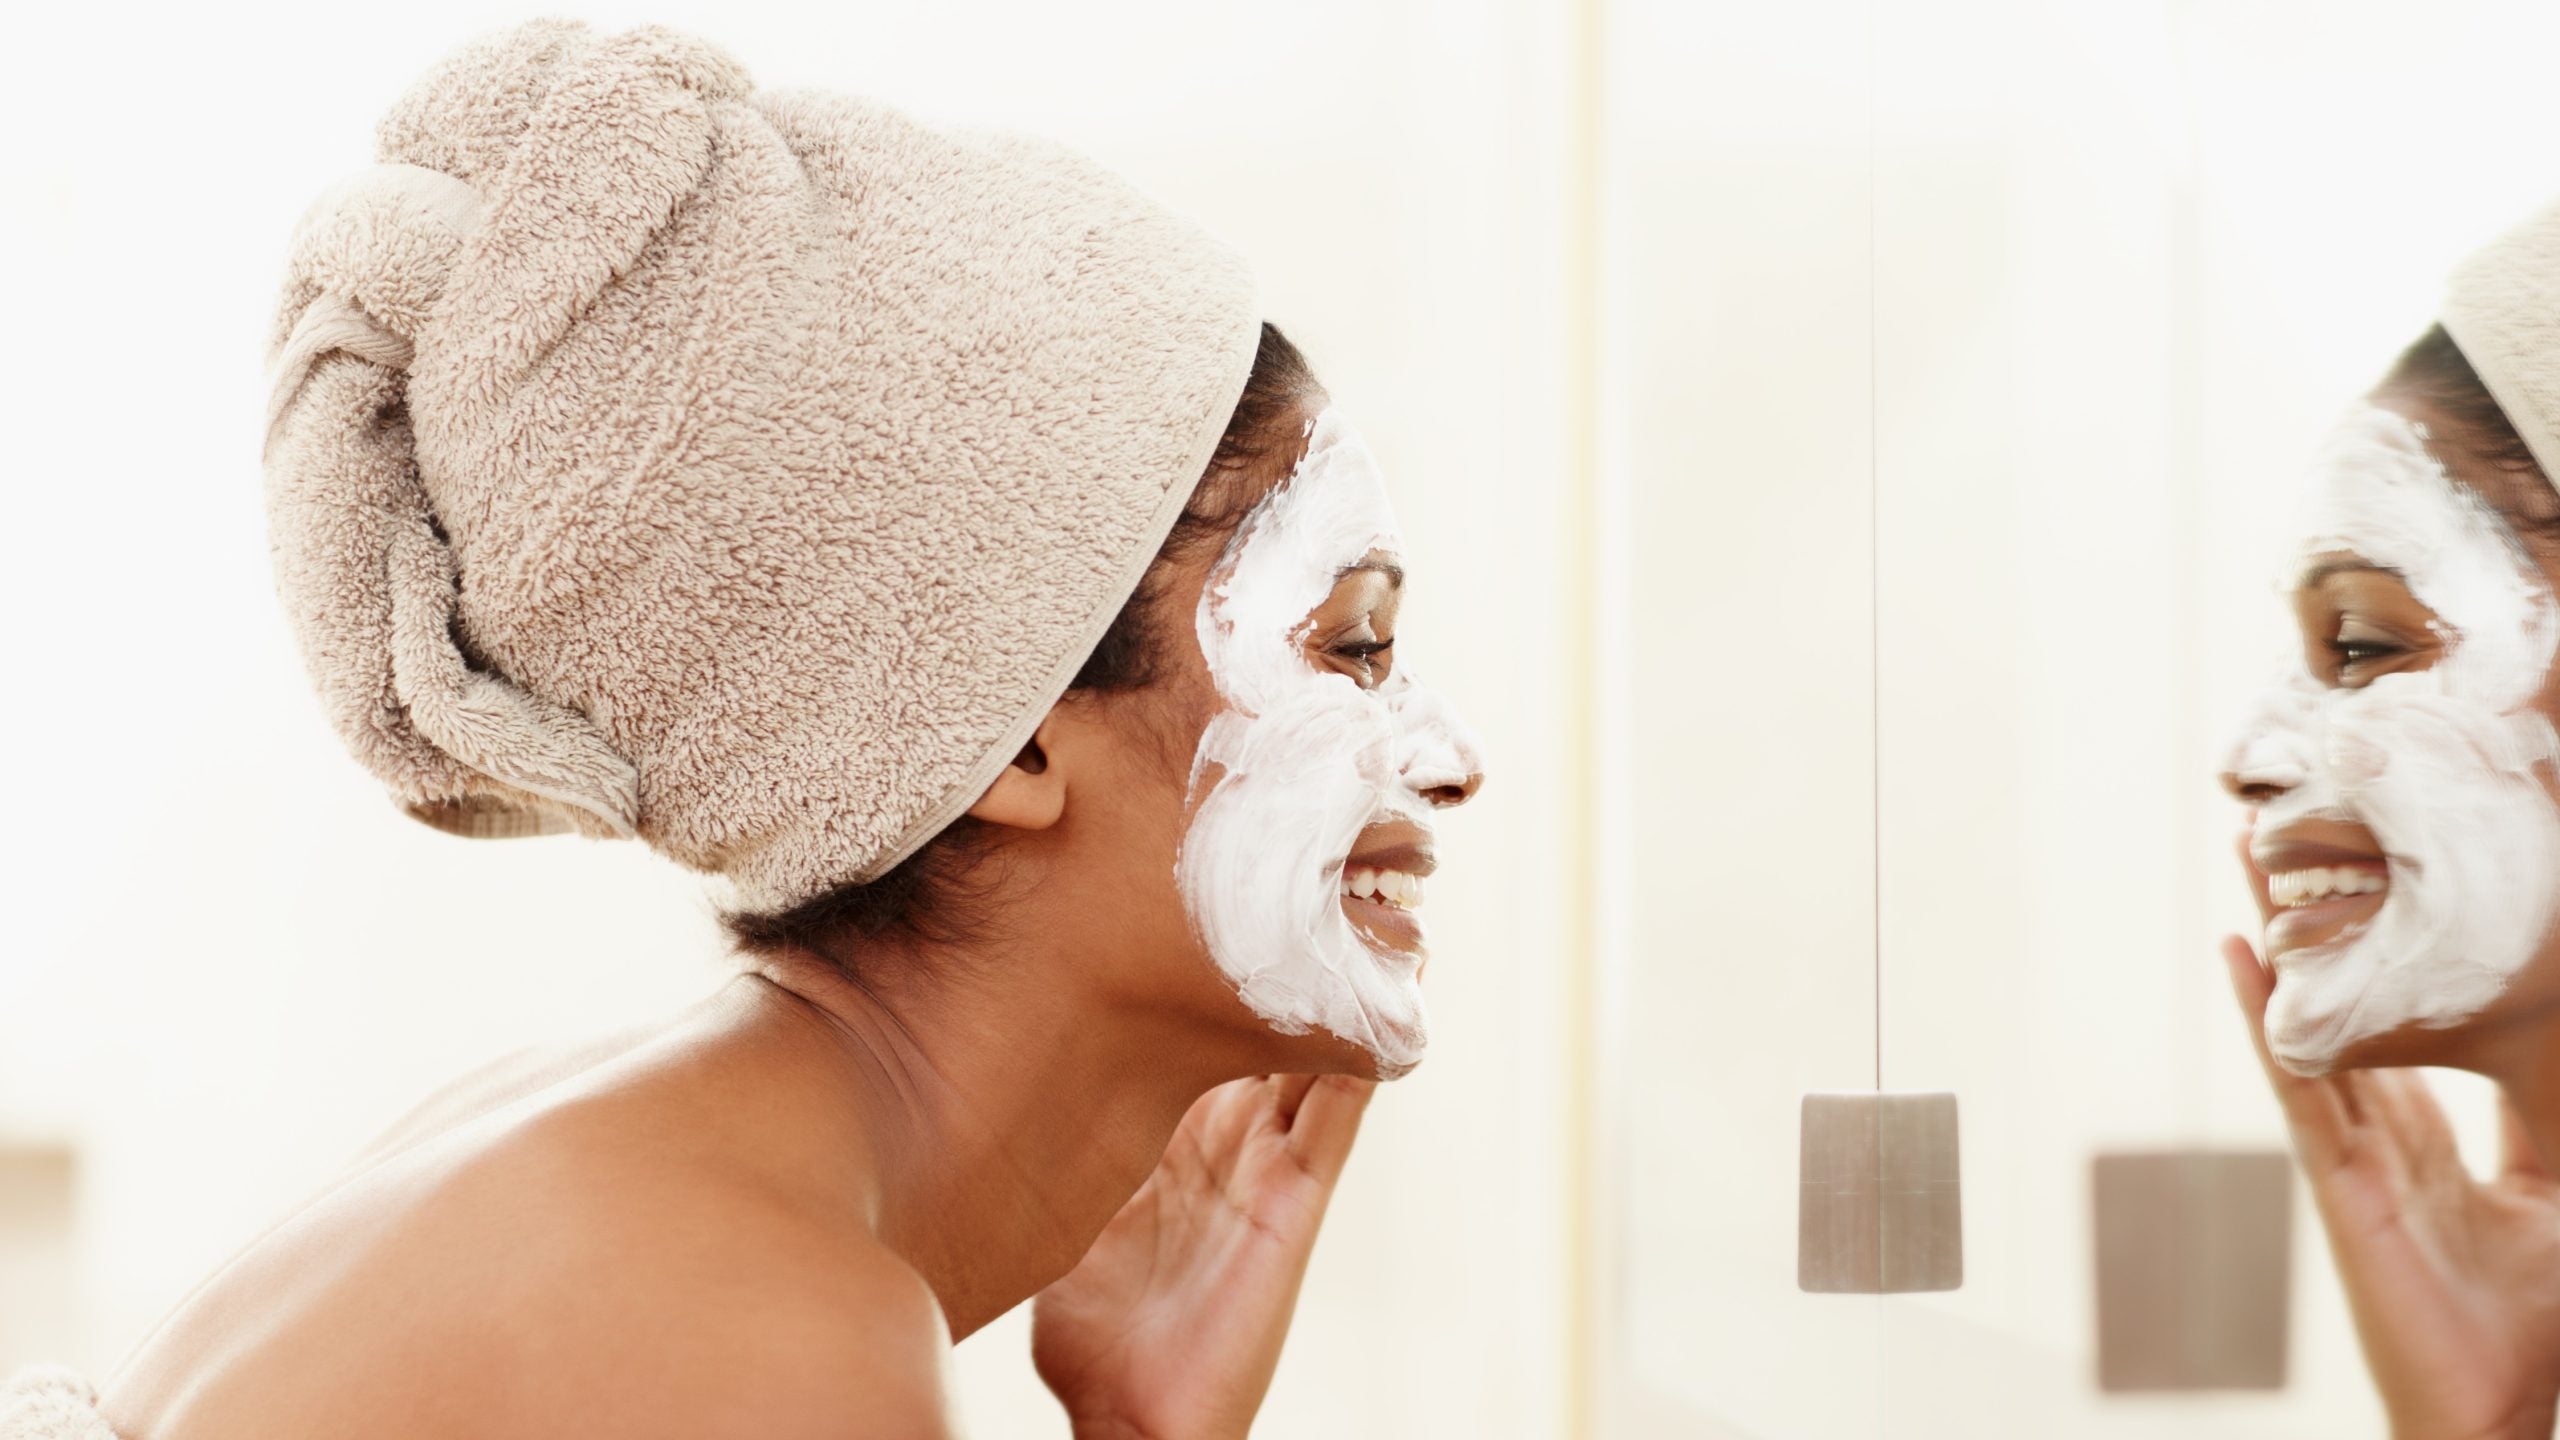 Want Clear, Glowy Skin? Here’s 7 Deep-Cleansing Face Masks That Will Make It Happen